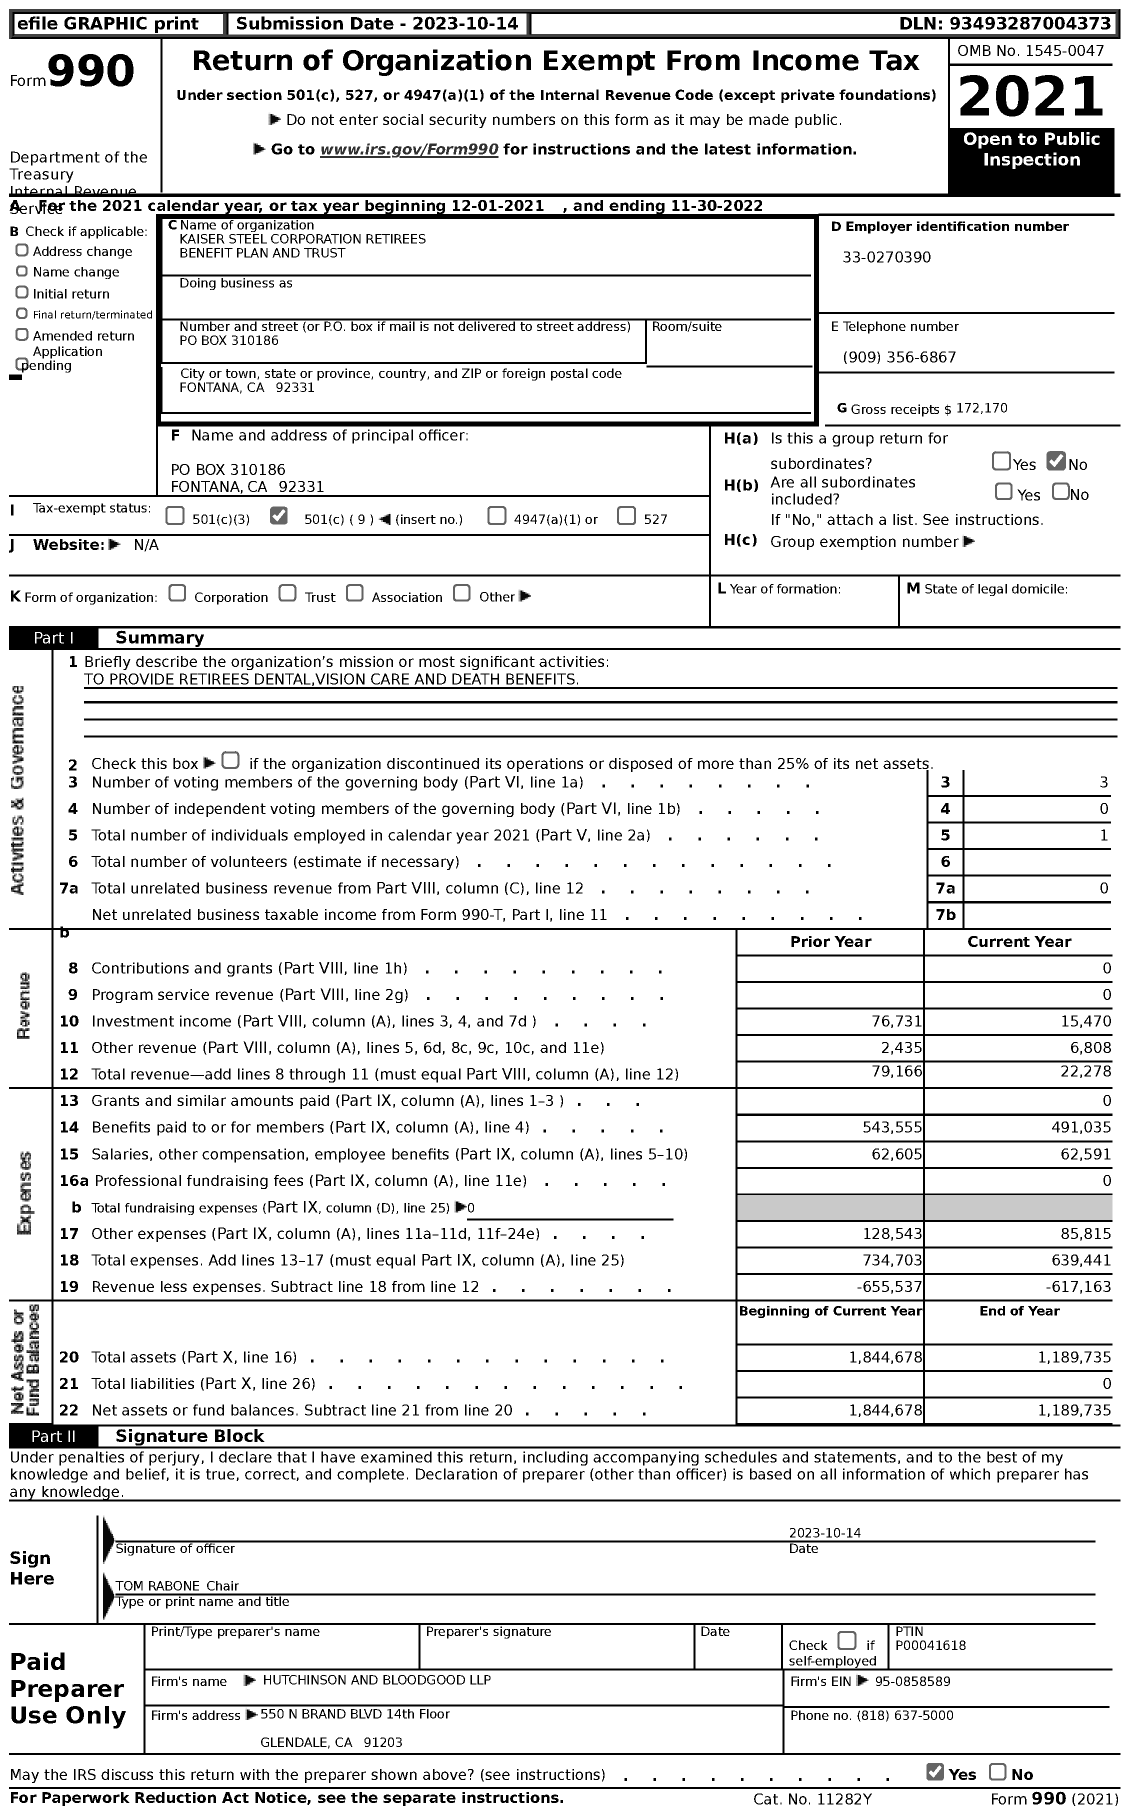 Image of first page of 2021 Form 990 for Kaiser Steel Corporation Retirees Benefit Plan and Trust